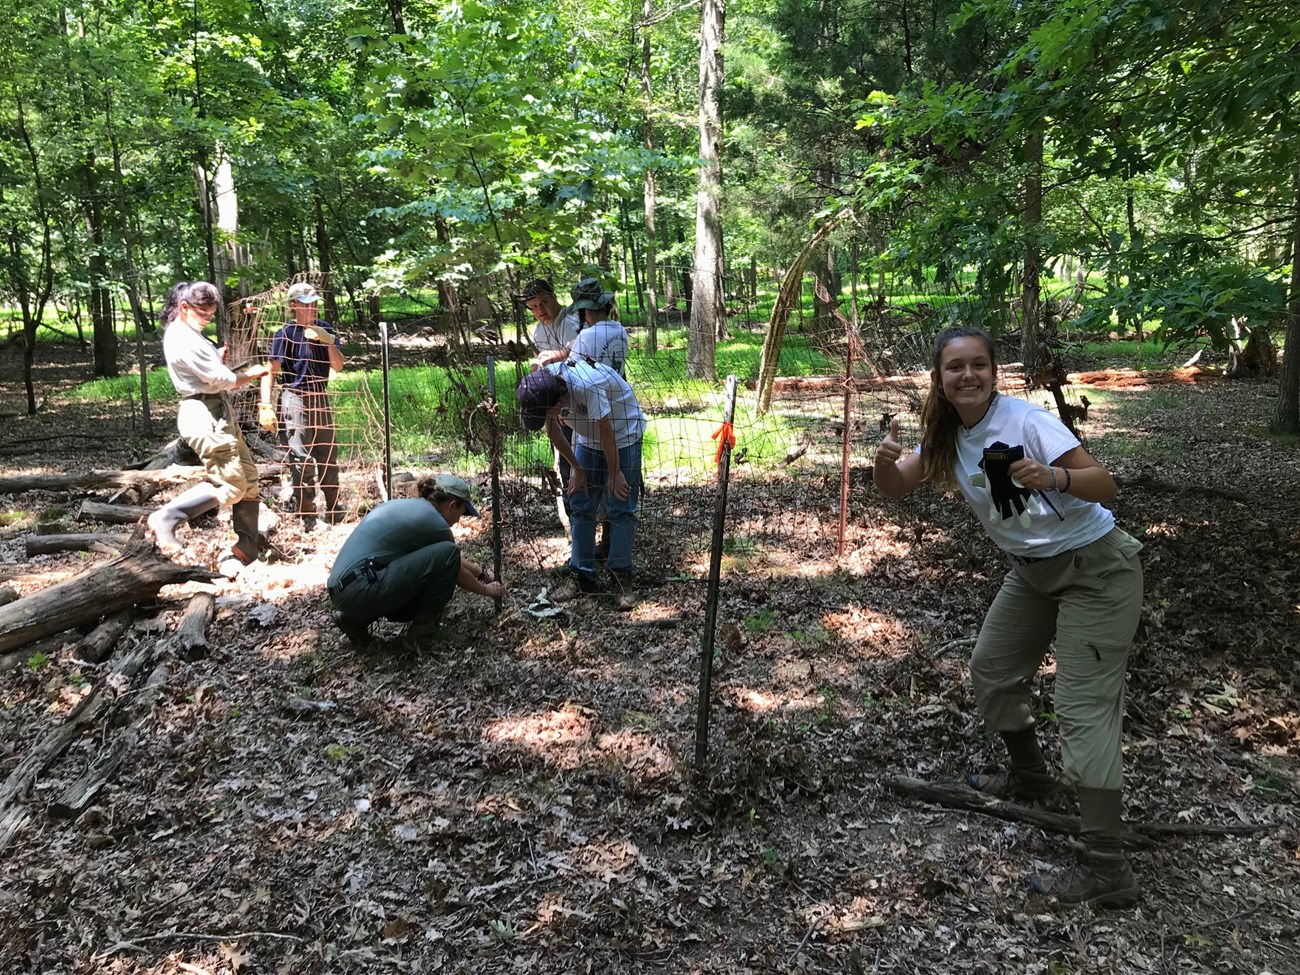 Several YCC team members construct a deer exclosure in the woods.